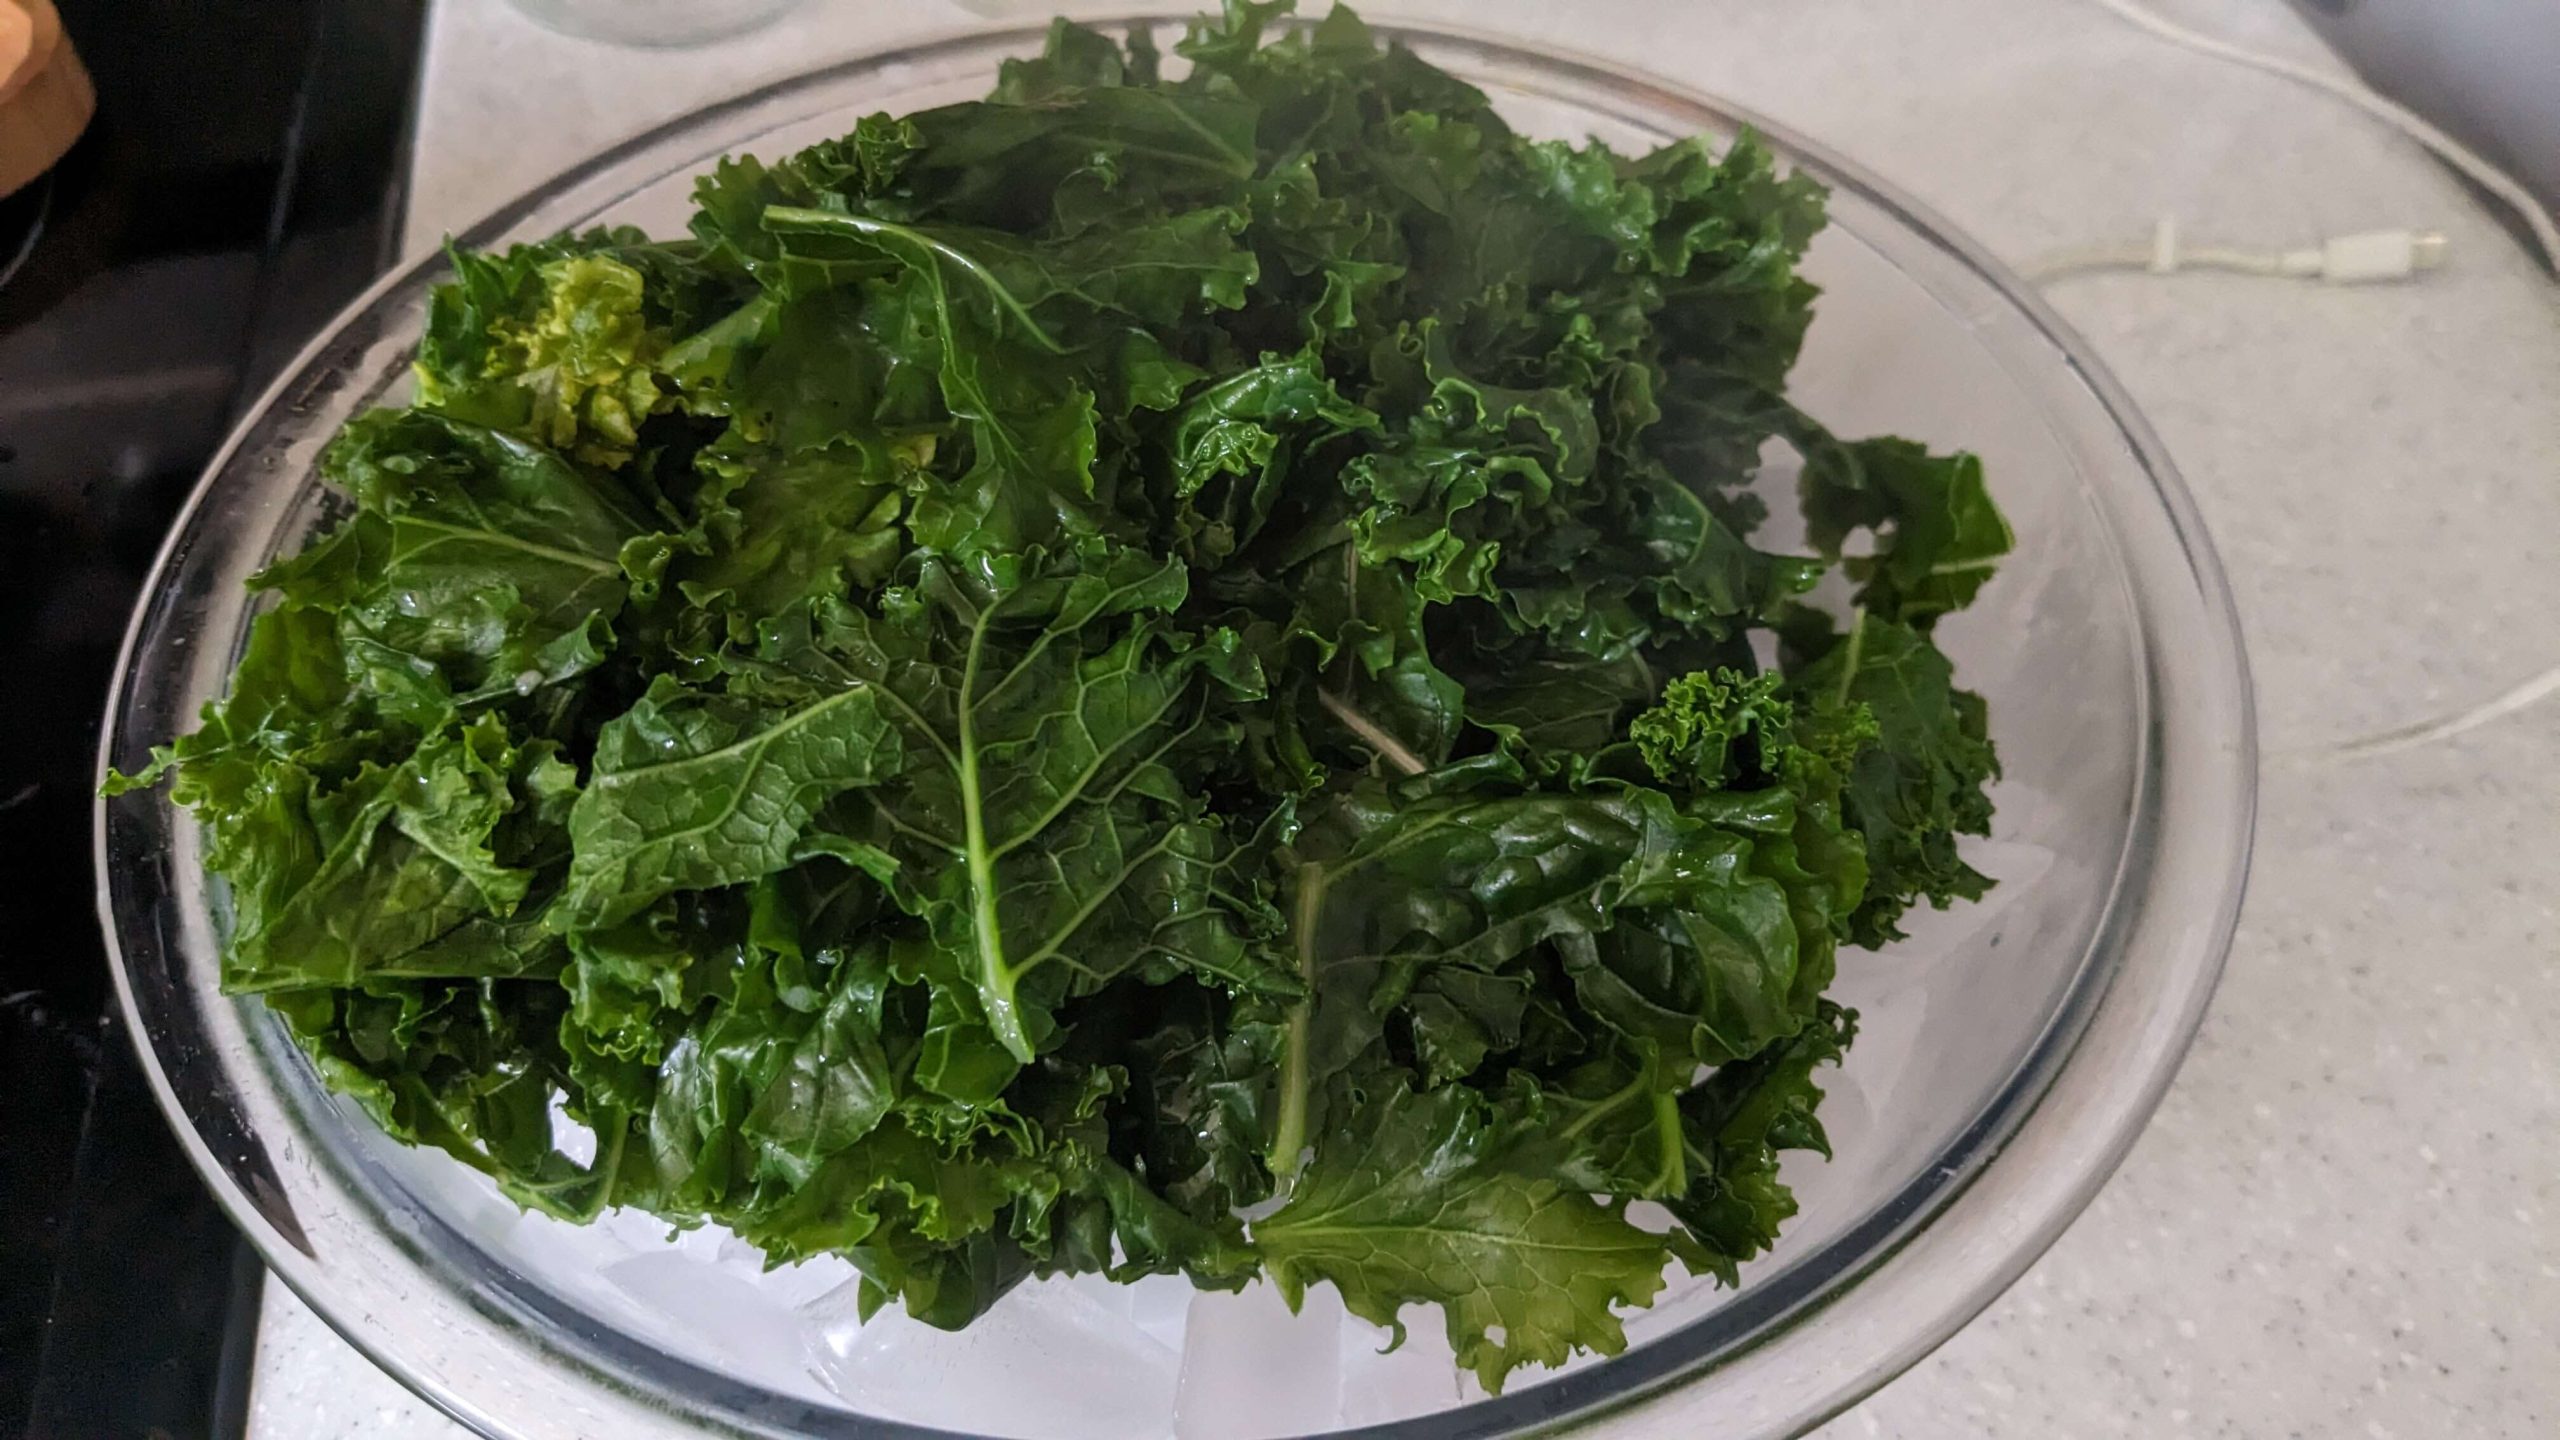 wet blanched kale in a bowl of ice